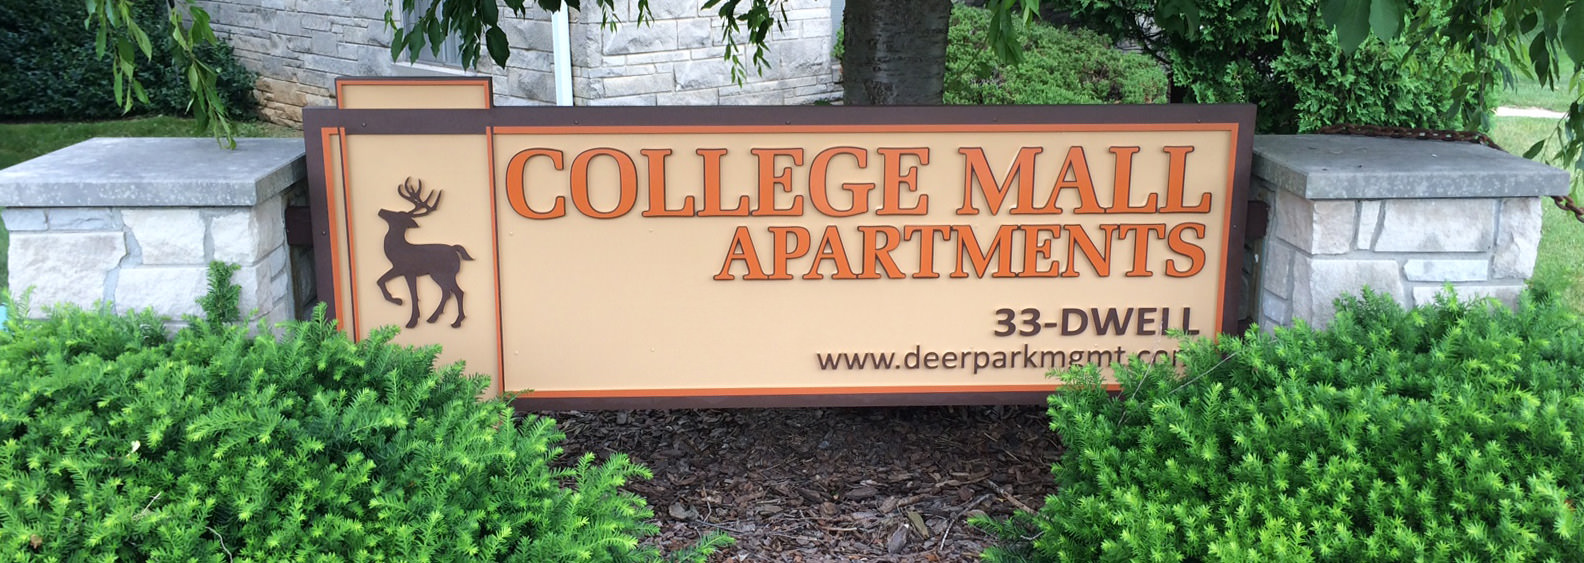 monument-sign-college-mall-apartments